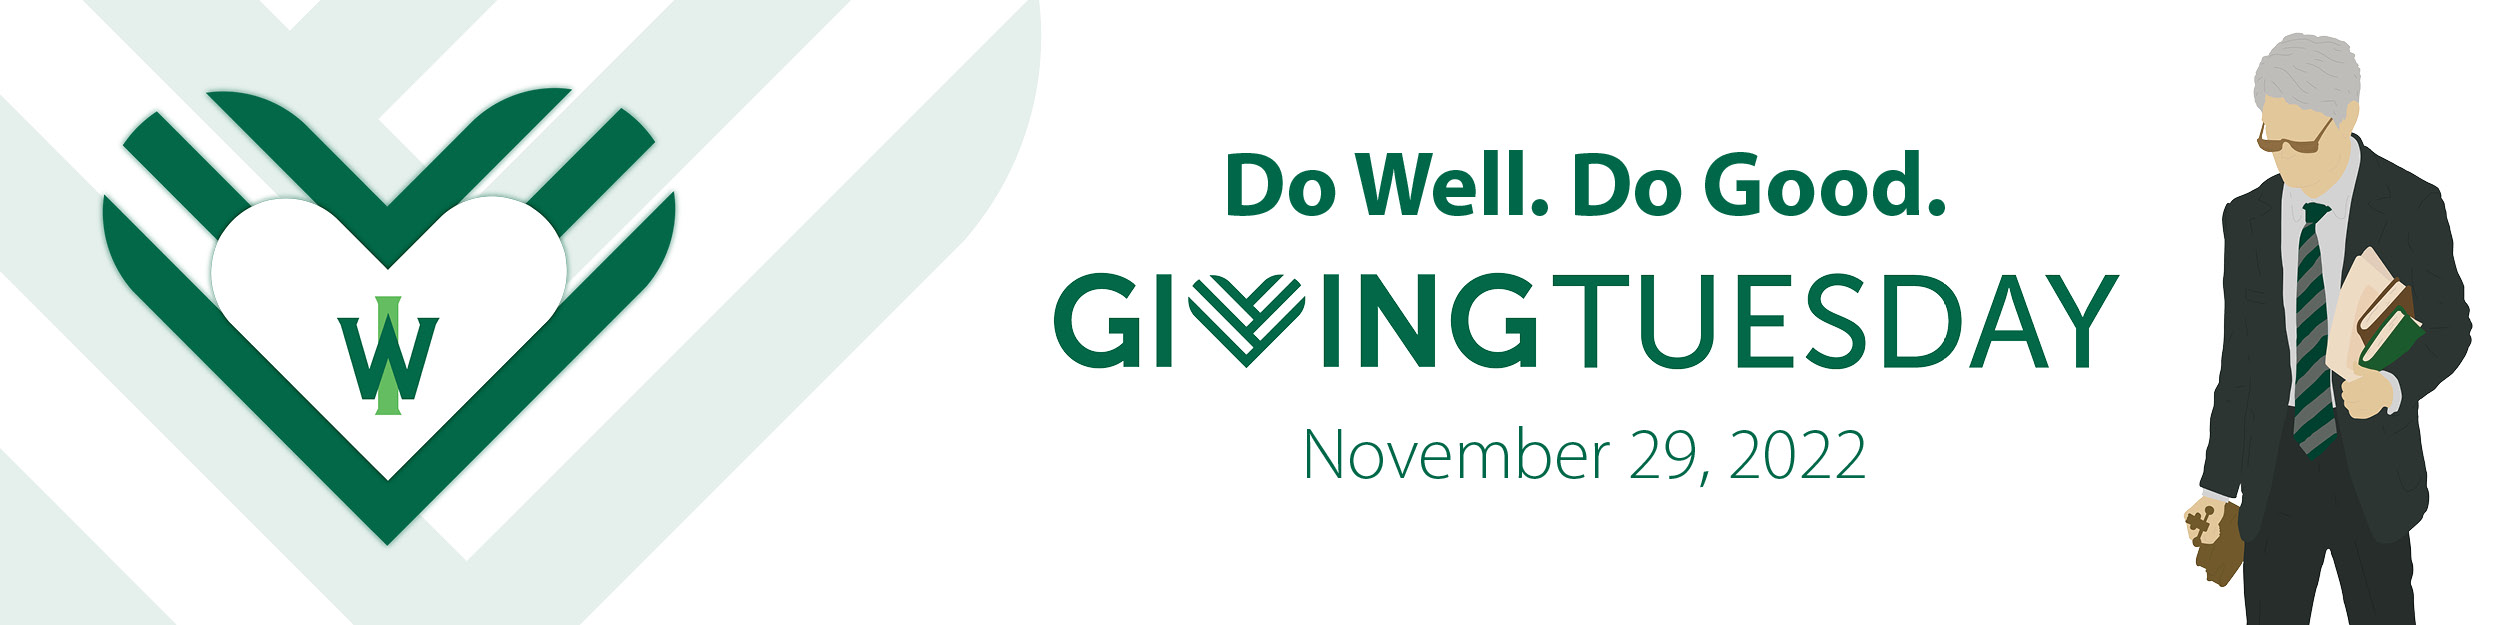 Giving Tuesday email header